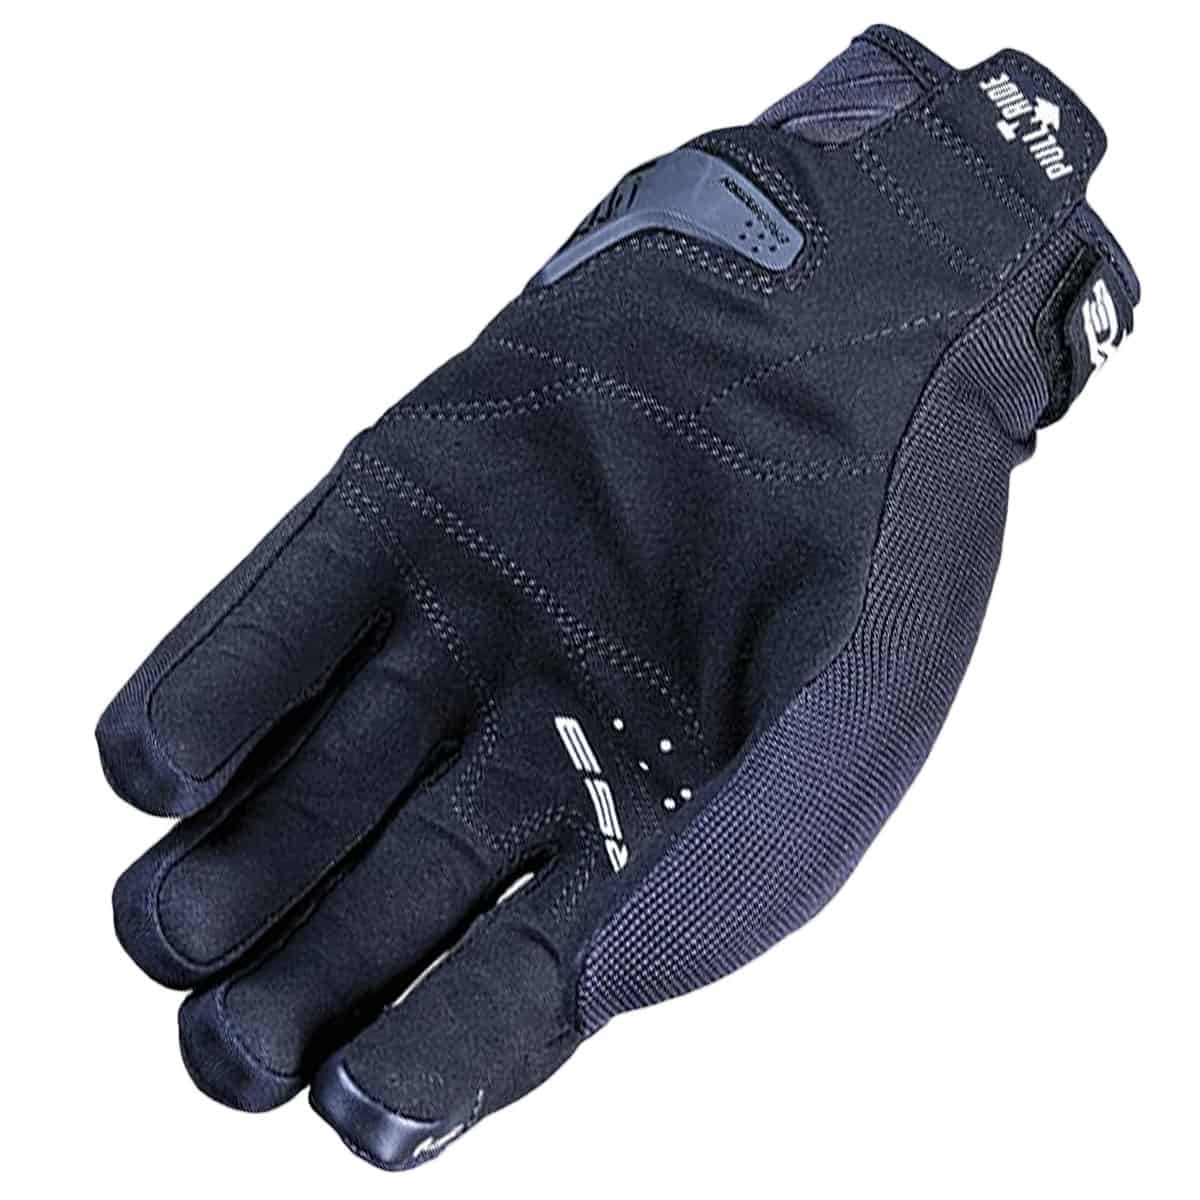 Five RS3 Evo Motorcycle Summer Gloves: Urban basics at their best palm